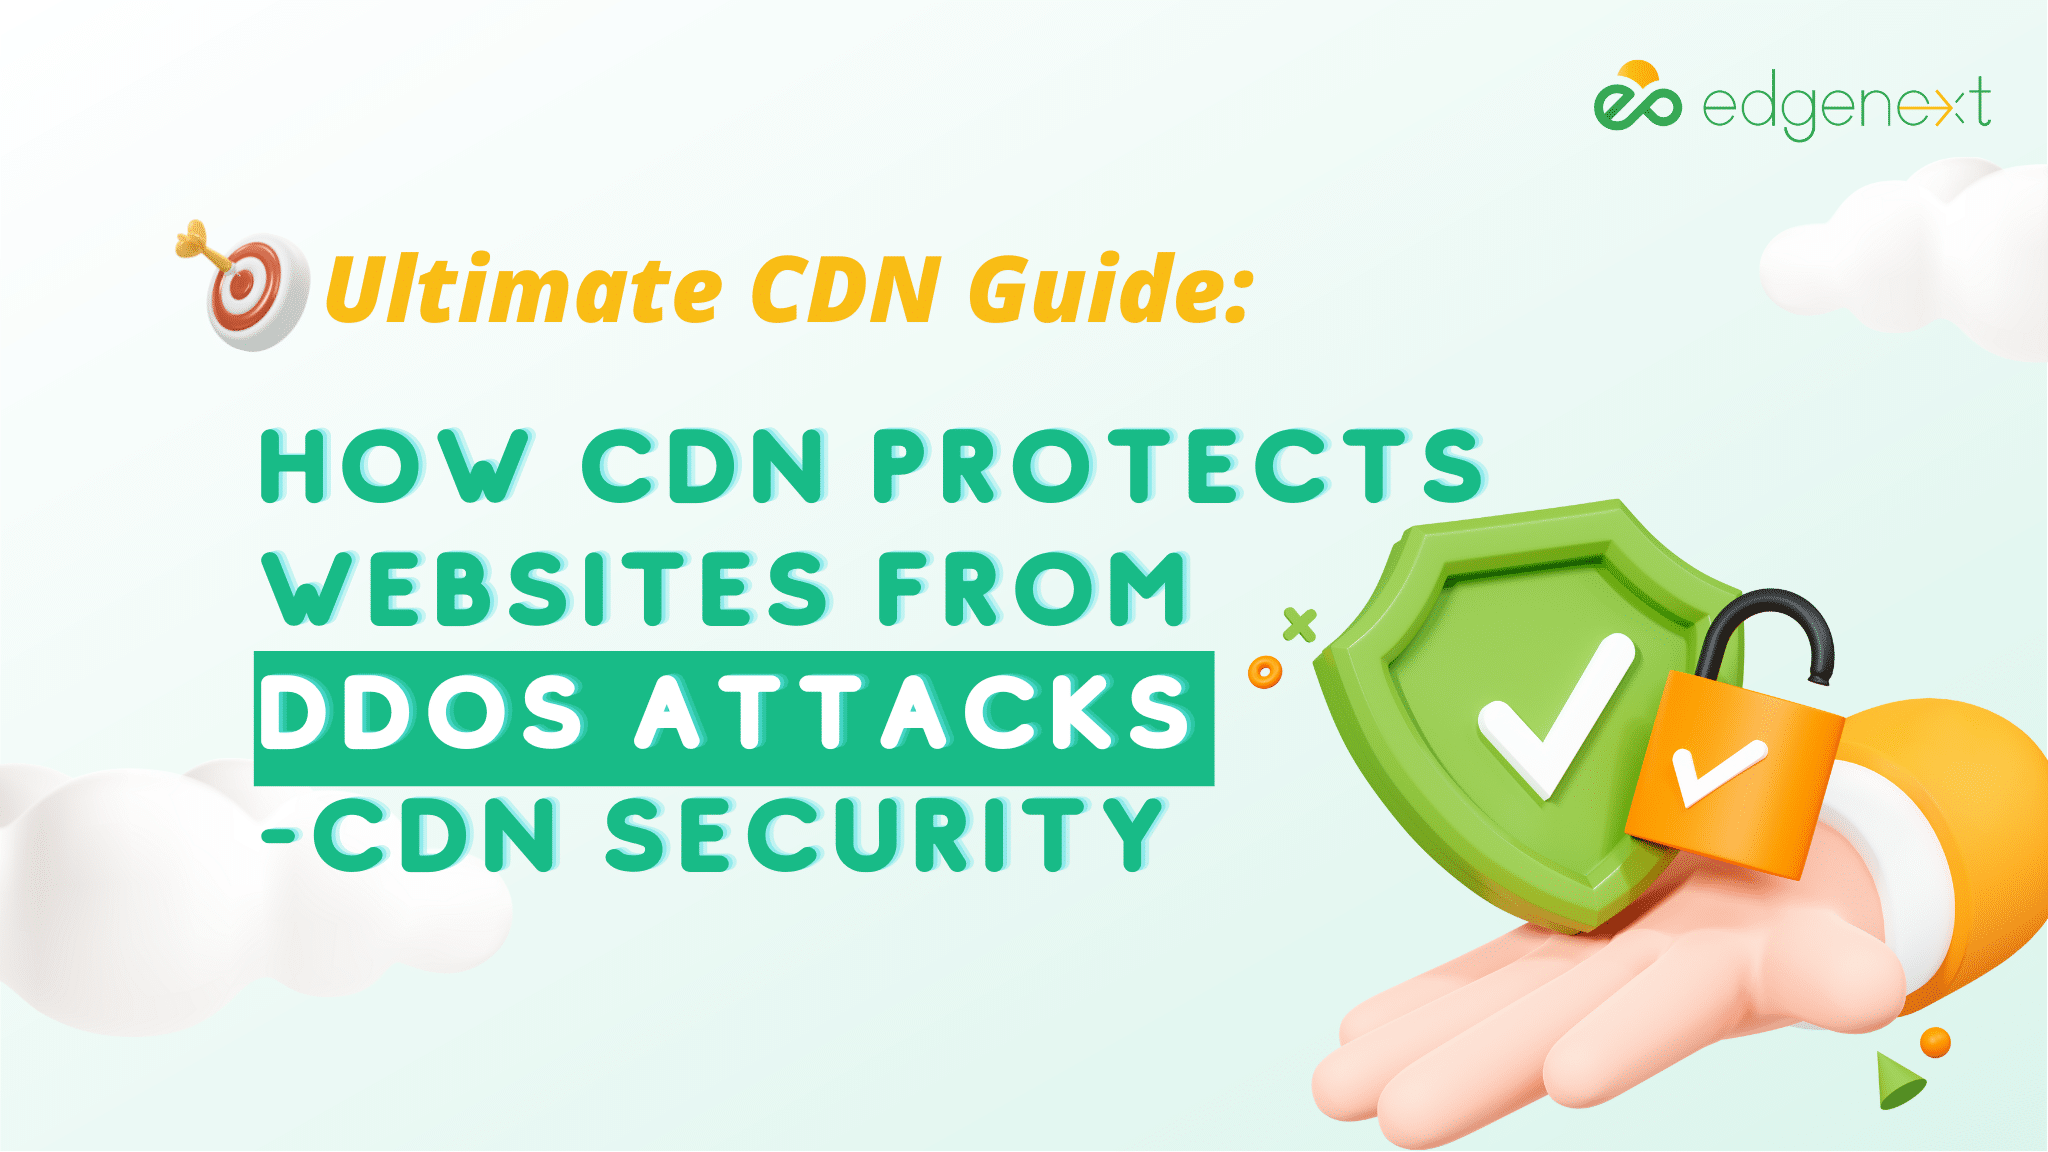 How Security CDN Protects Websites from DDoS Attacks ｜ CDN Security